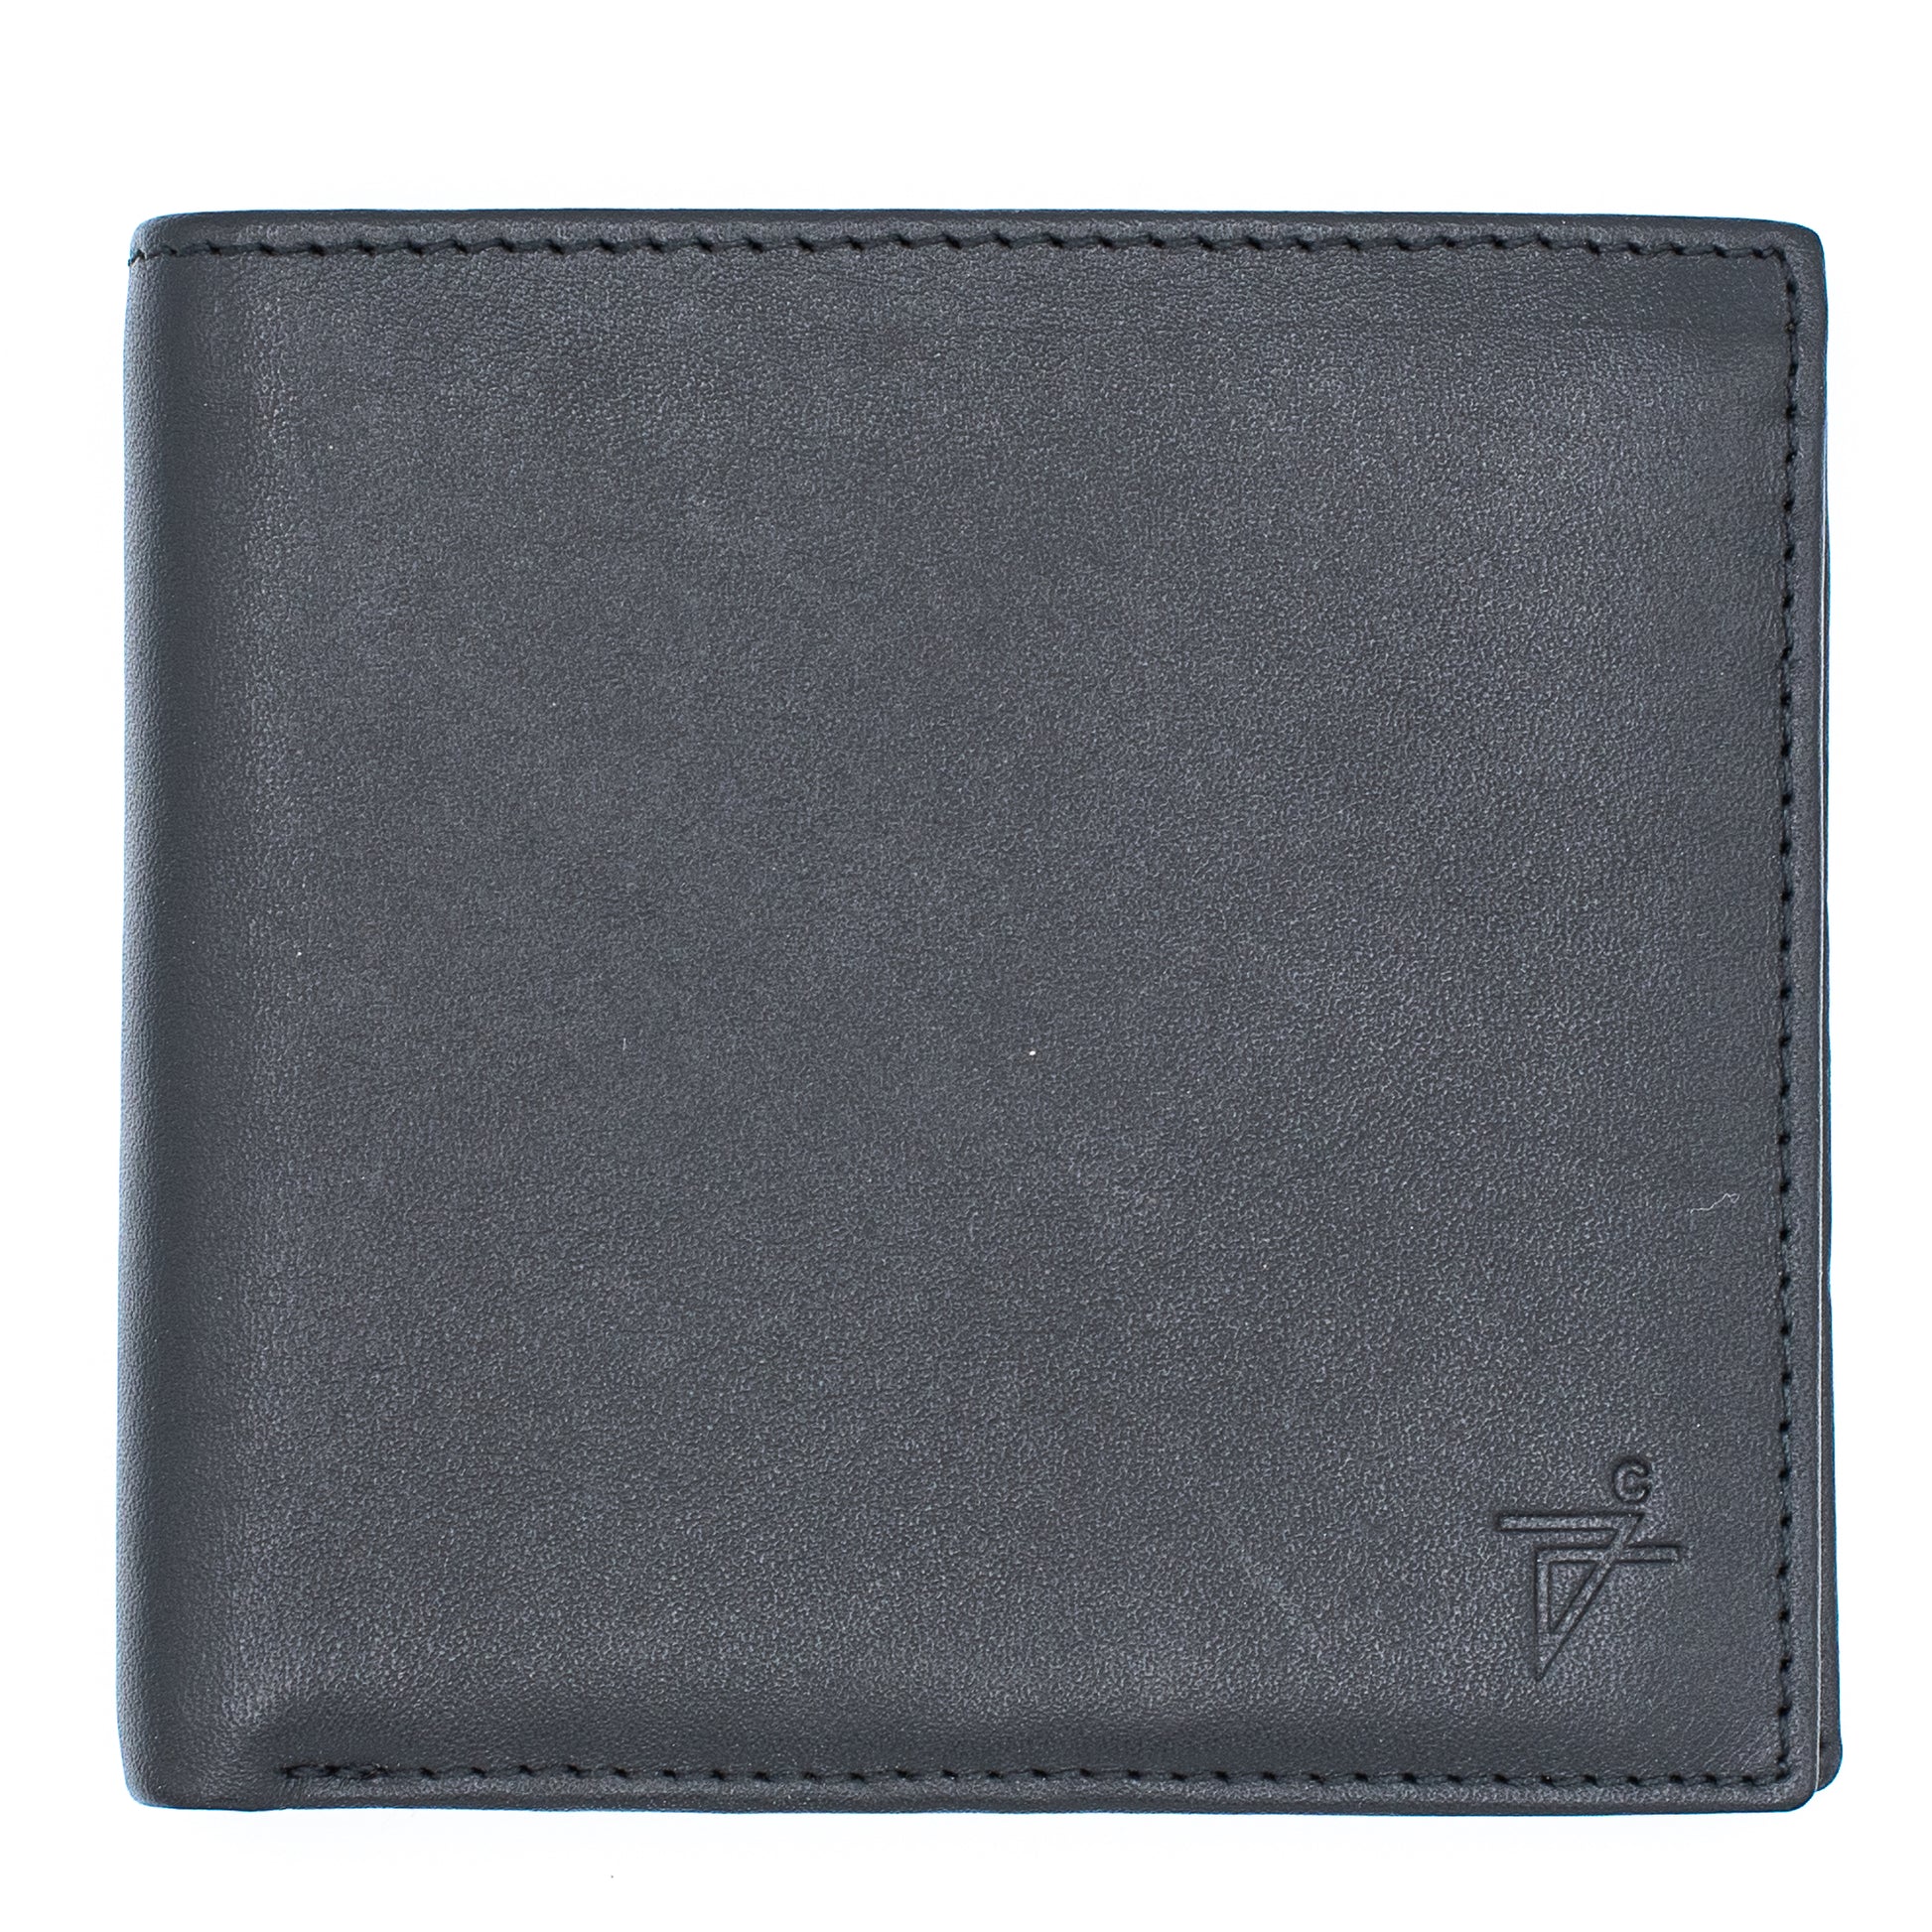 Prada Credit Card Holder/Wallet, Black Leather, Authentic, Chic Gift, SALE